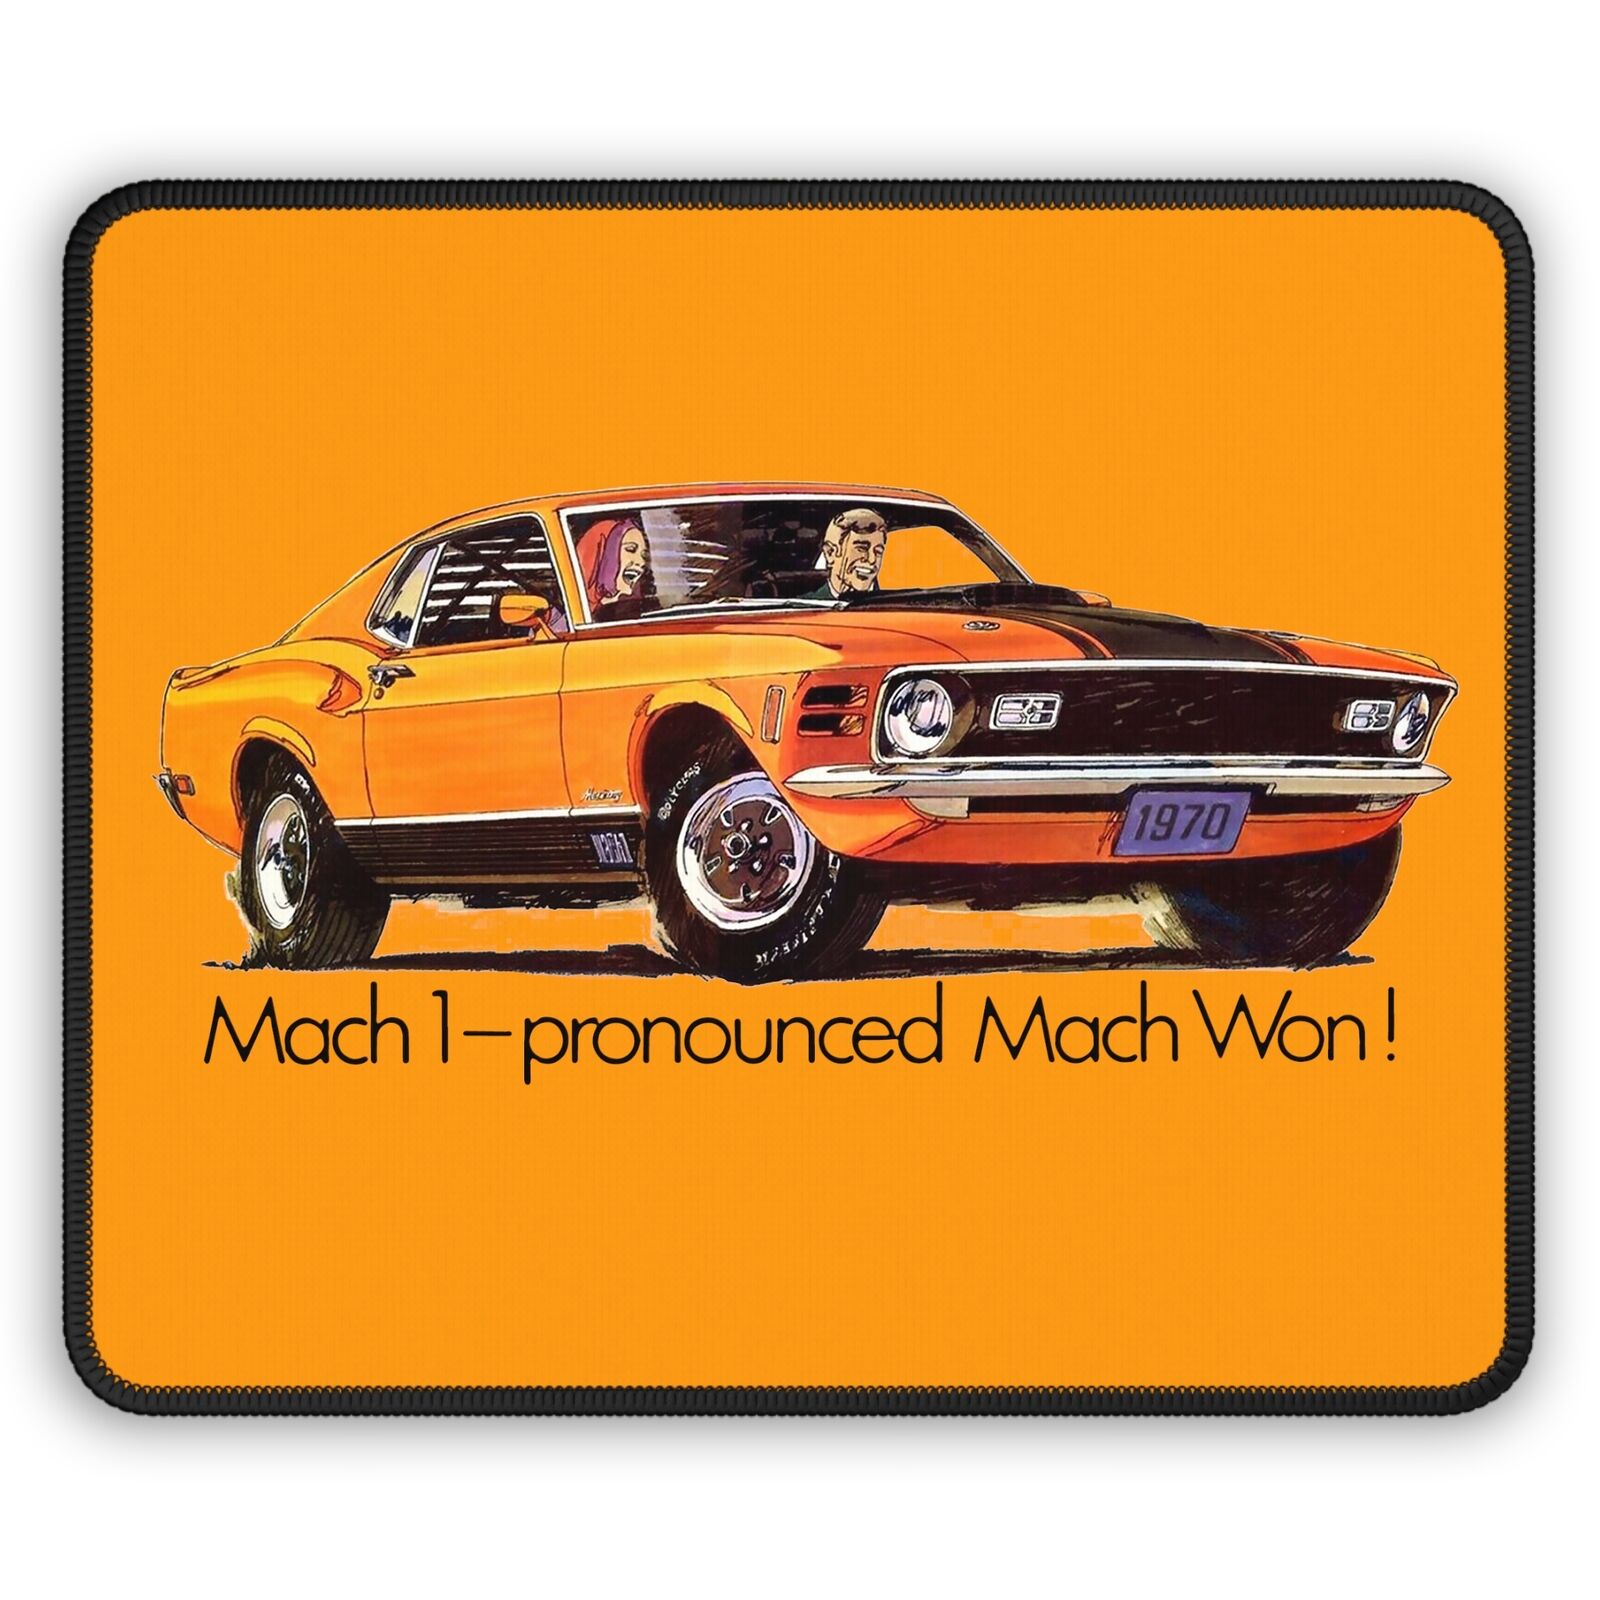 Ford Mustang Mach 1 - 1970 Print Ad - Custom Premium Quality Mouse Pad